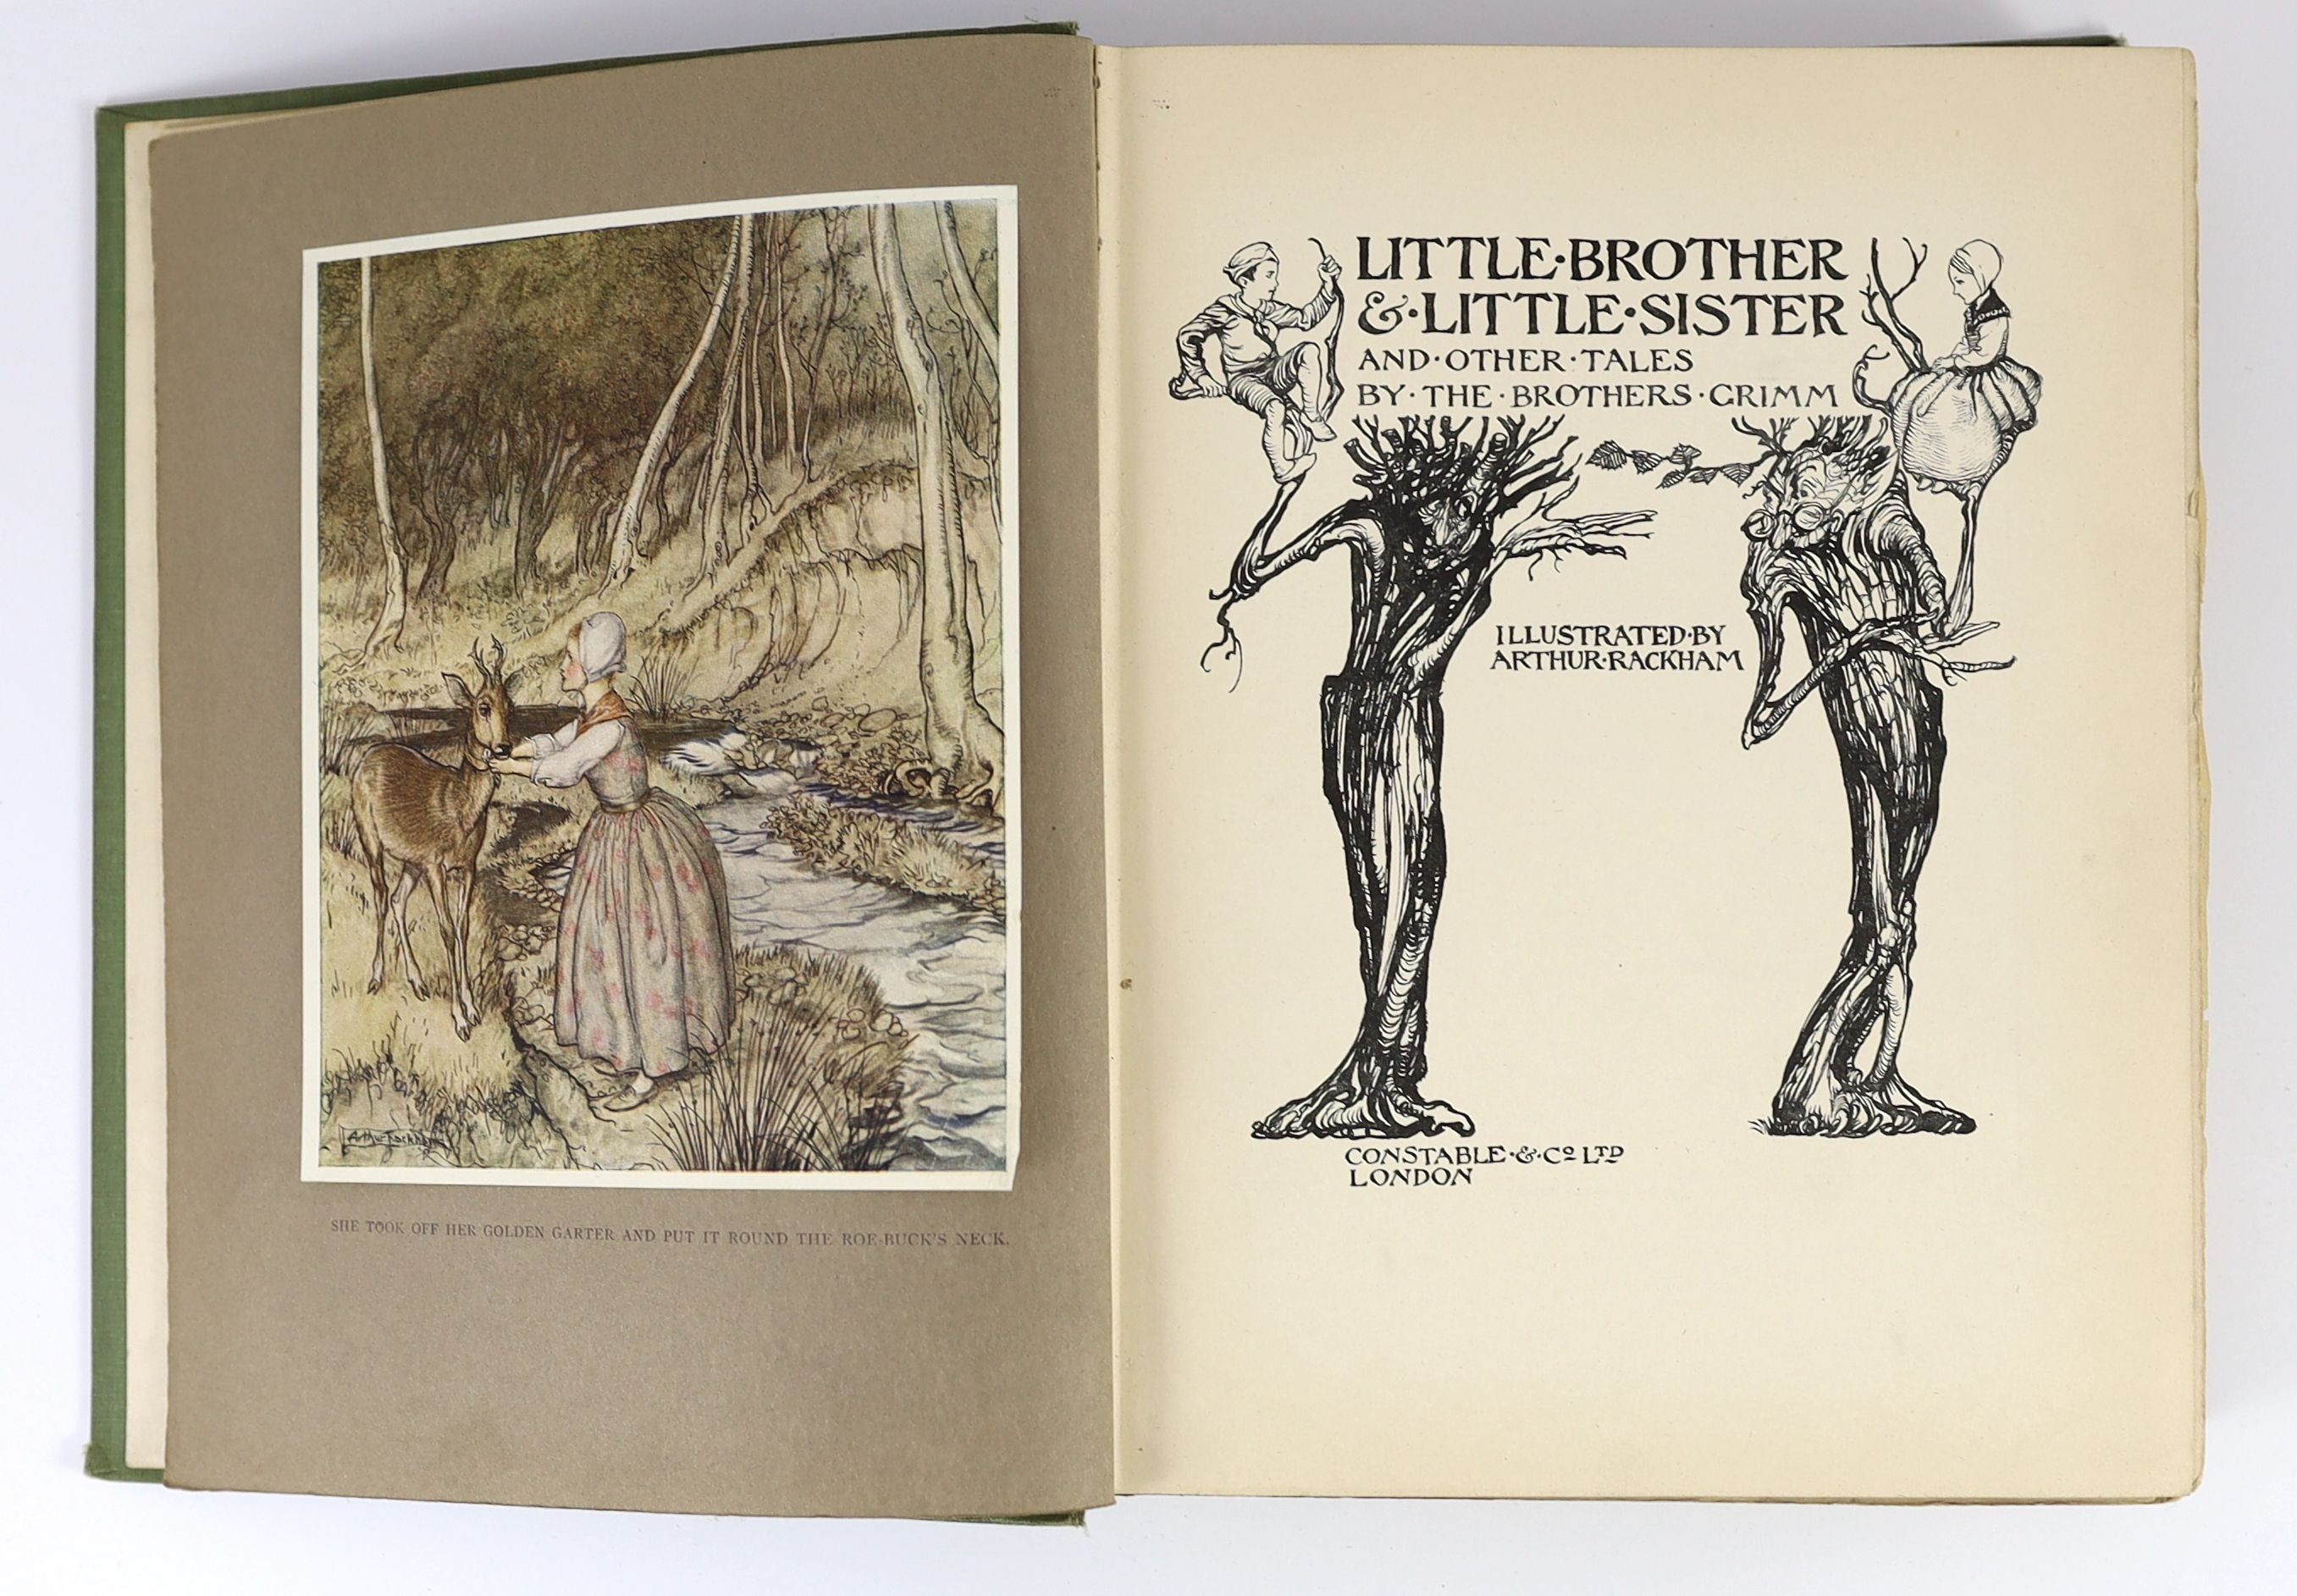 Grimm, Jacob and Wilhem - Little Brother & Little Sister, with frontis and 11 tipped-in colour illustrations by Arthur Rackham, 4to, green cloth gilt, Constable, London, 1917